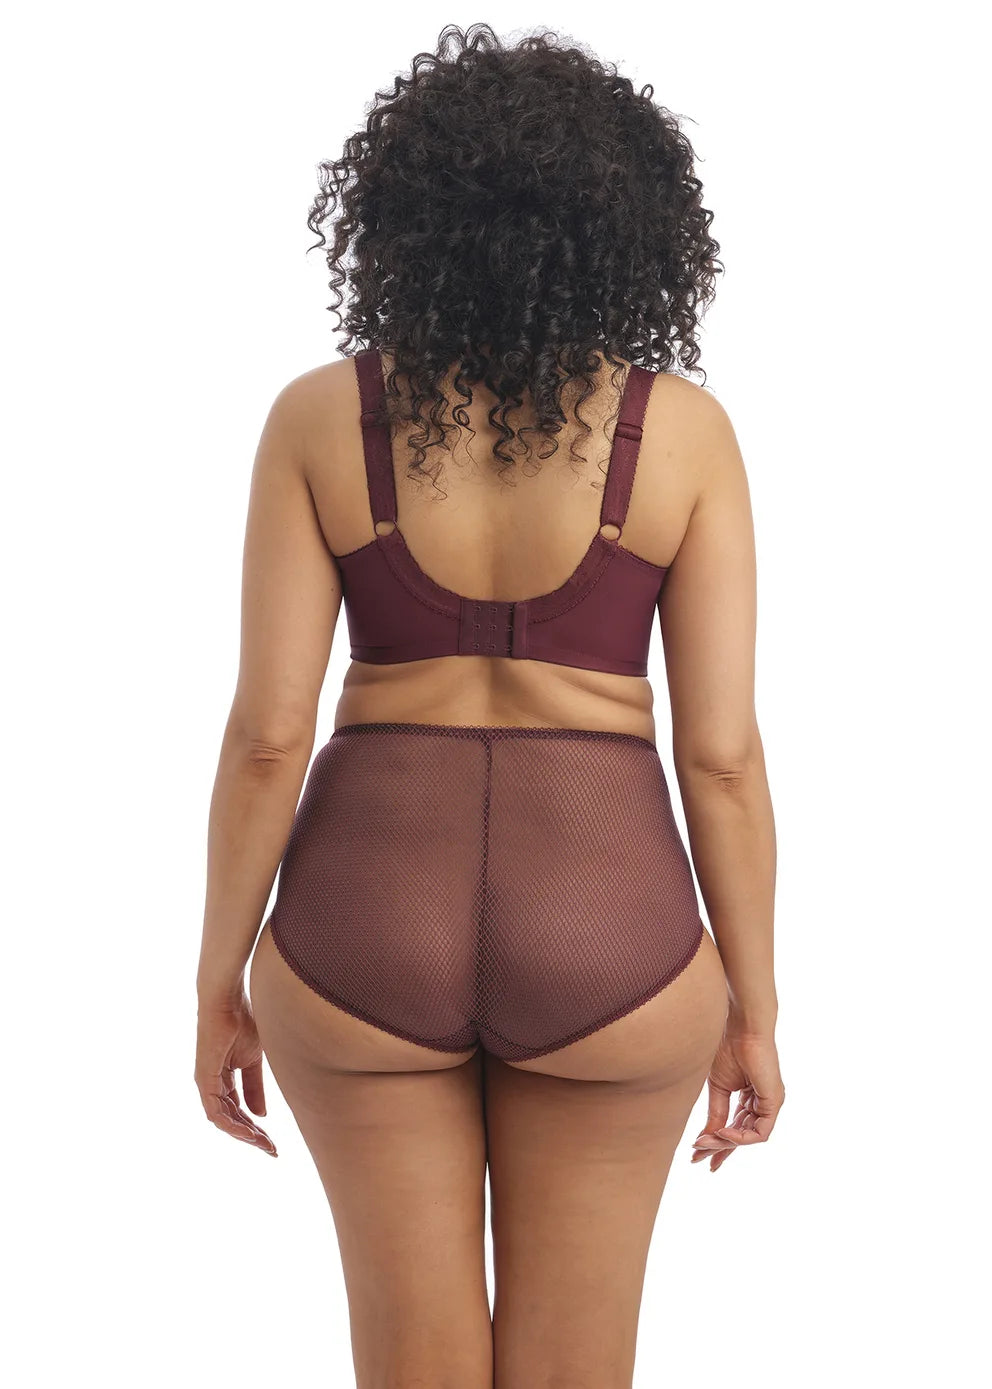 Charley Bandless Molded Spacer Bra from Elomi in Aubergine at Belle Lacet Lingerie in Chandler-Phoenix